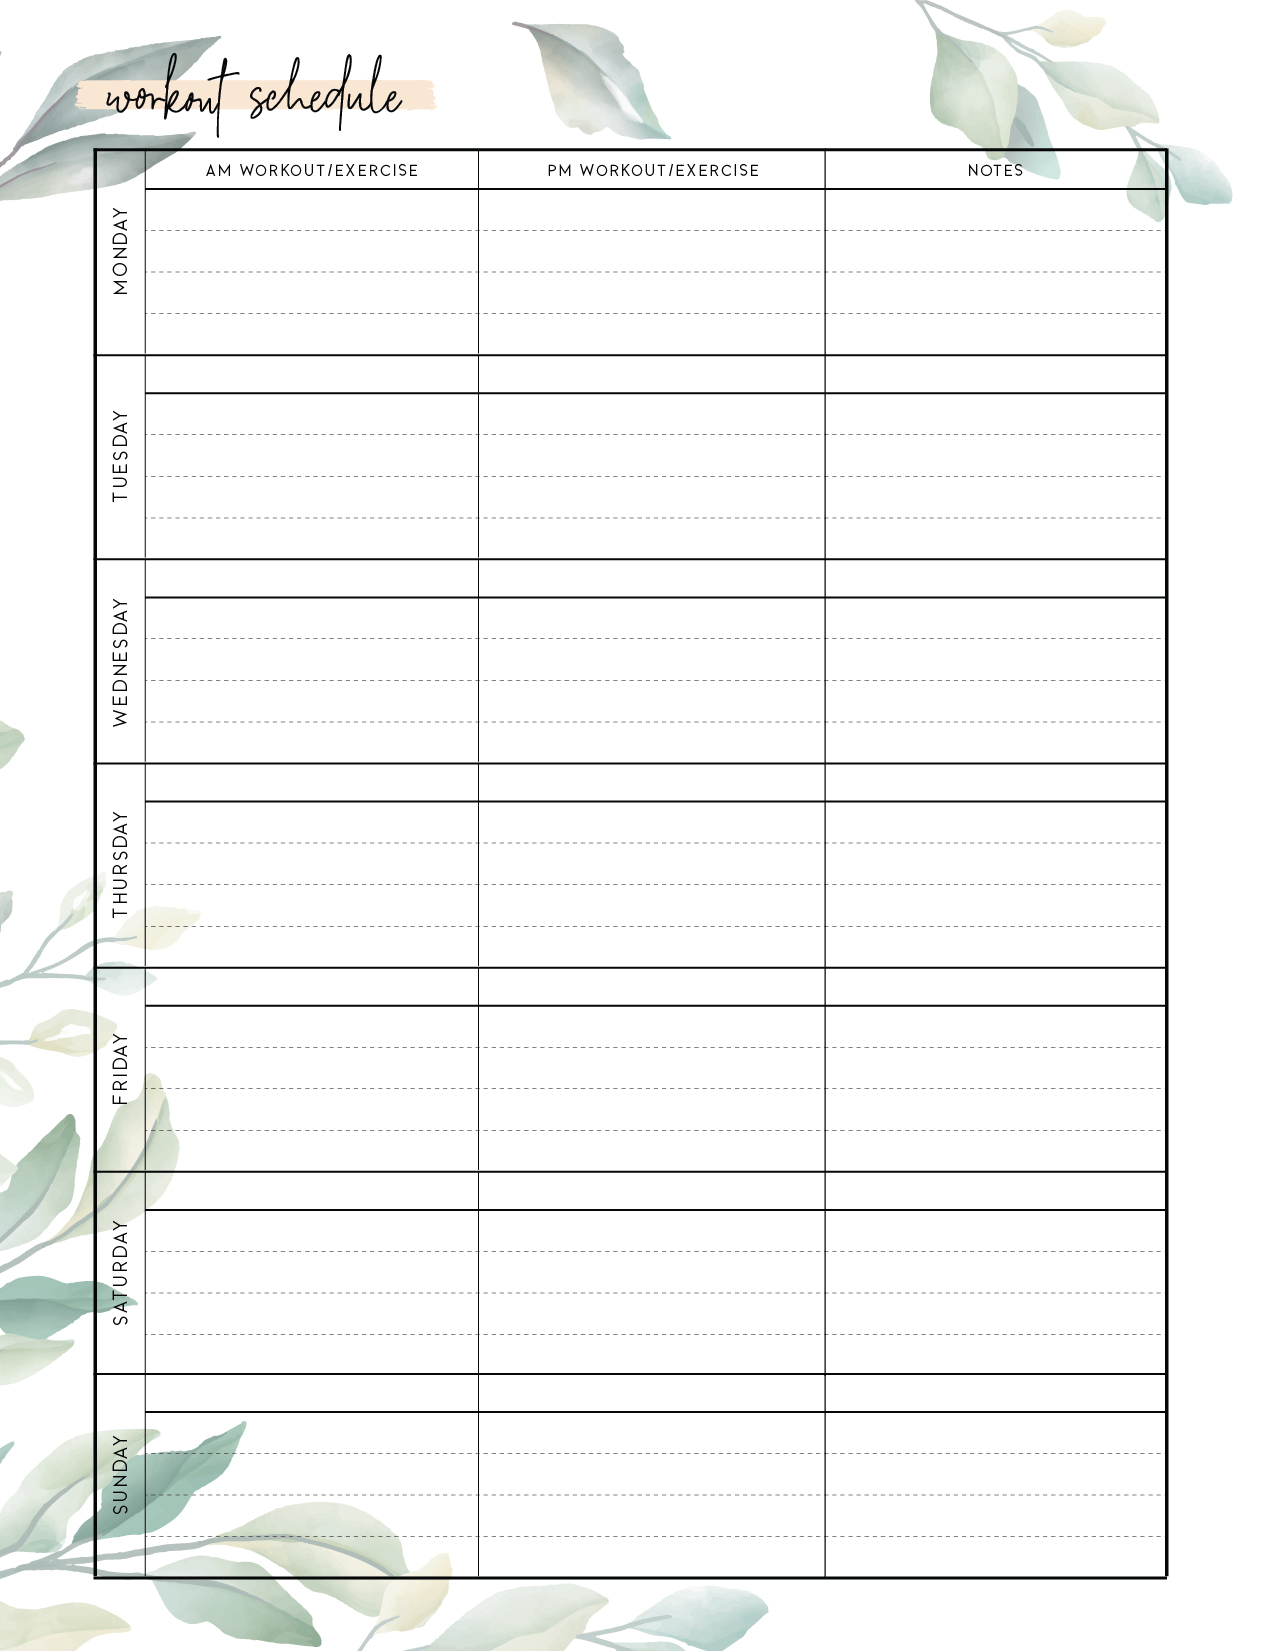 Free Printable Workout Schedule Template - World of Printables With Regard To Blank Workout Schedule Template